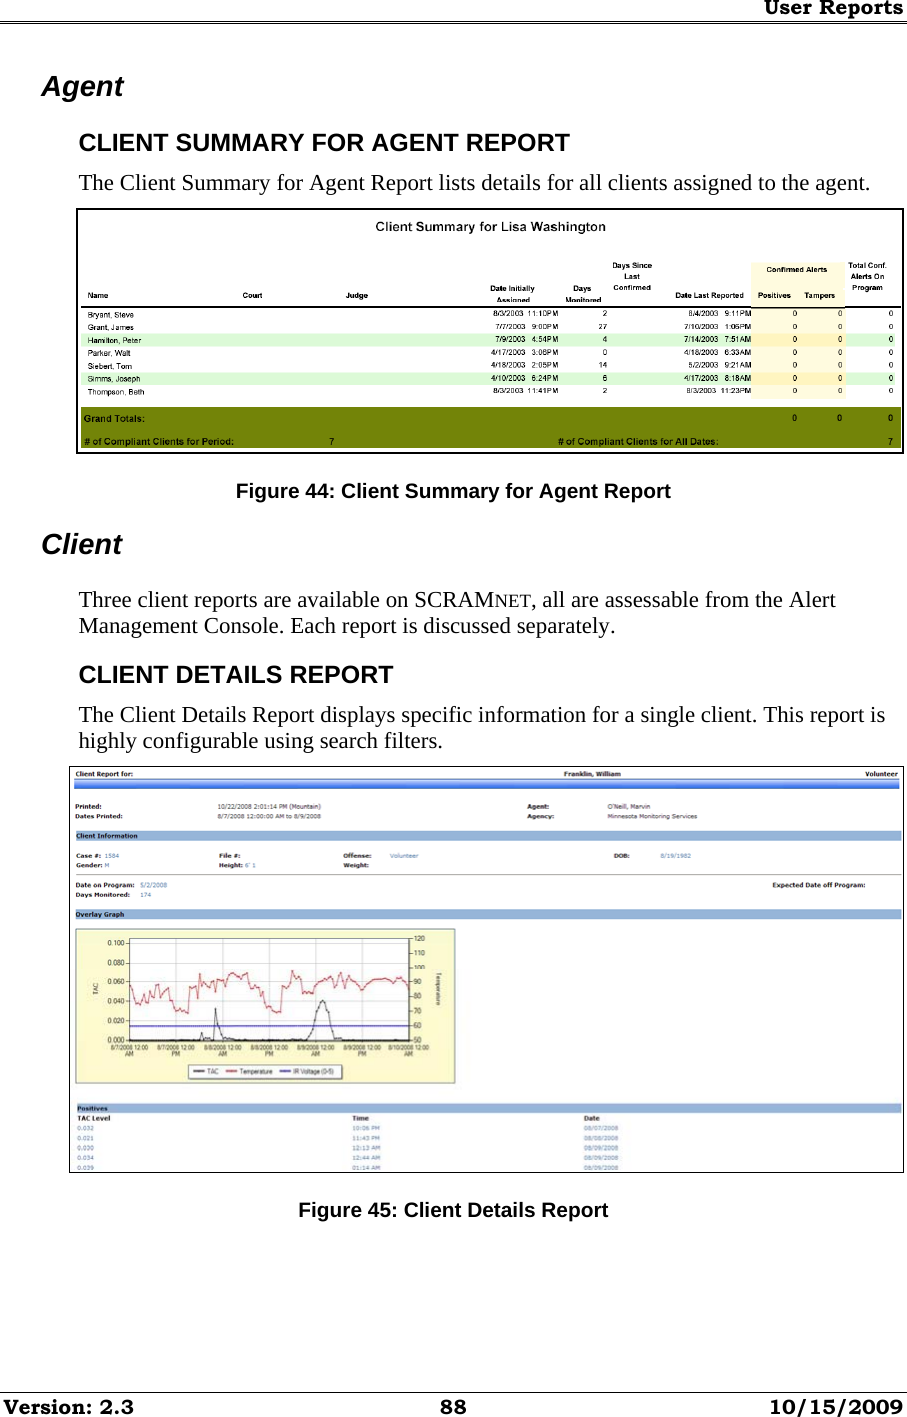 User Reports Version: 2.3  88  10/15/2009 Agent CLIENT SUMMARY FOR AGENT REPORT The Client Summary for Agent Report lists details for all clients assigned to the agent.  Figure 44: Client Summary for Agent Report Client Three client reports are available on SCRAMNET, all are assessable from the Alert Management Console. Each report is discussed separately. CLIENT DETAILS REPORT The Client Details Report displays specific information for a single client. This report is highly configurable using search filters.  Figure 45: Client Details Report 